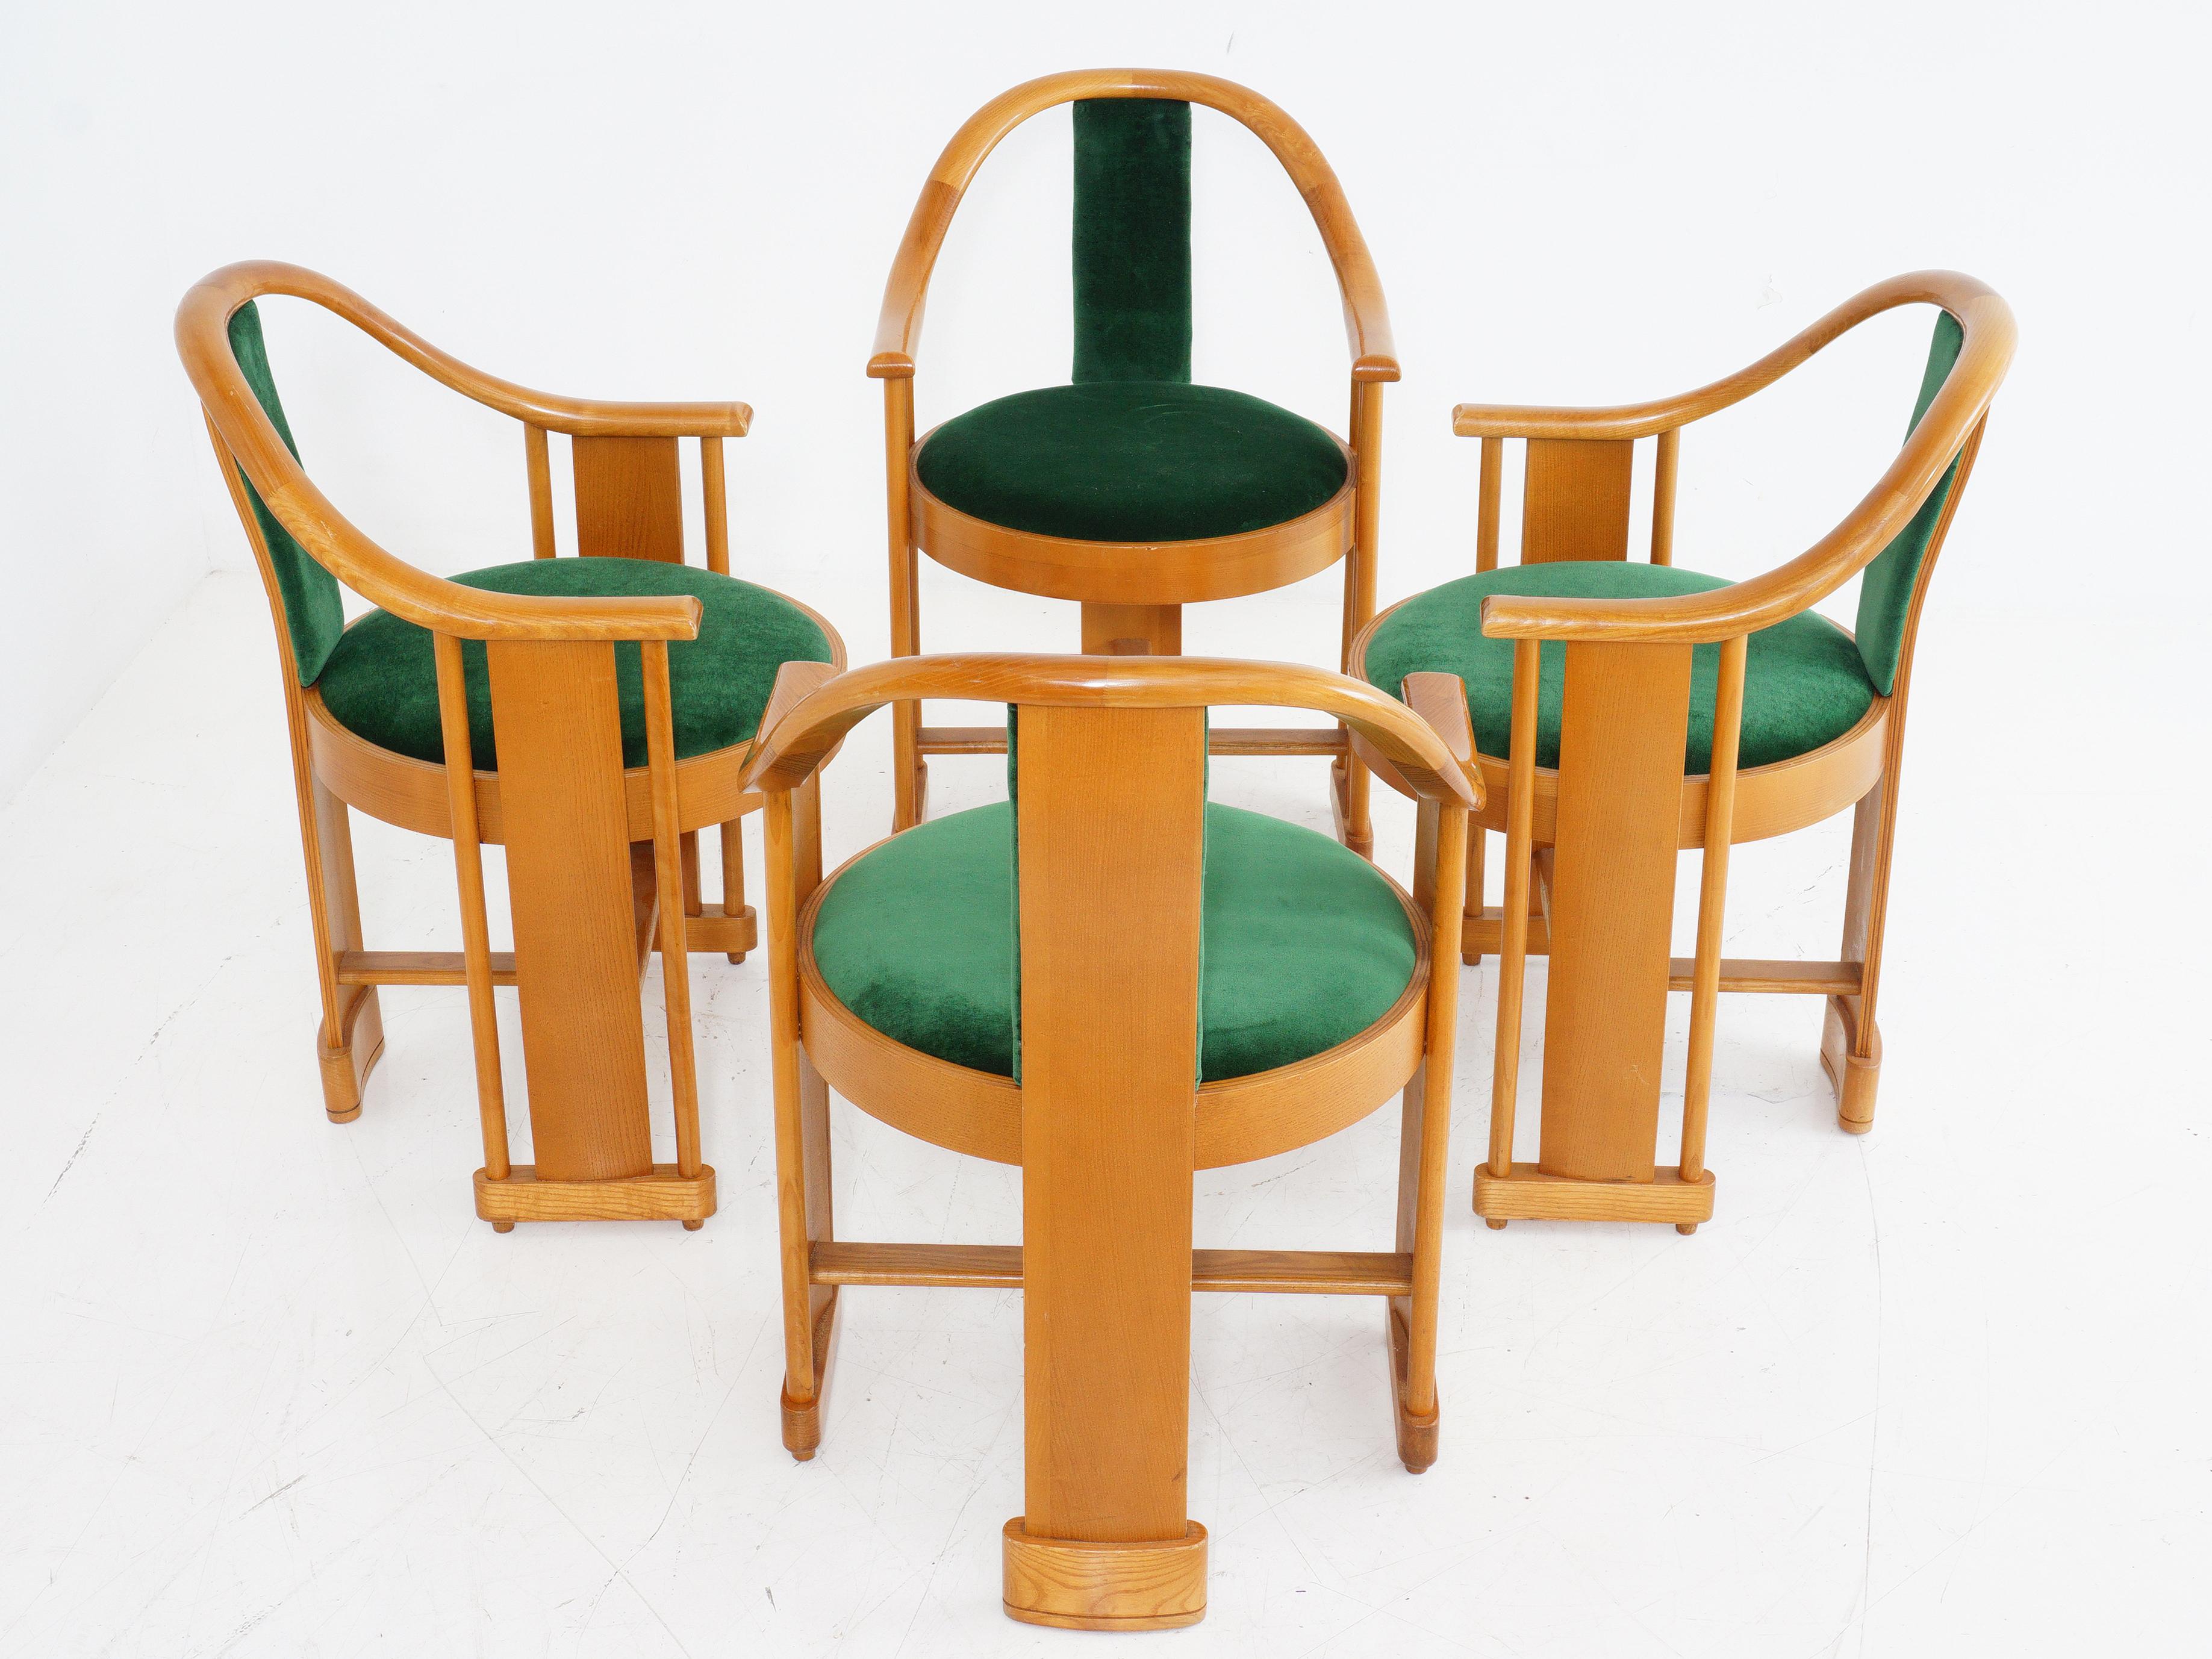 These Italian armchairs set a good example - your seating should have curves in all the right places. The aged pine rounded backs envelop you, while the emerald upholstery welcomes you with warmth and comfort. Classic craftsmanship fused with